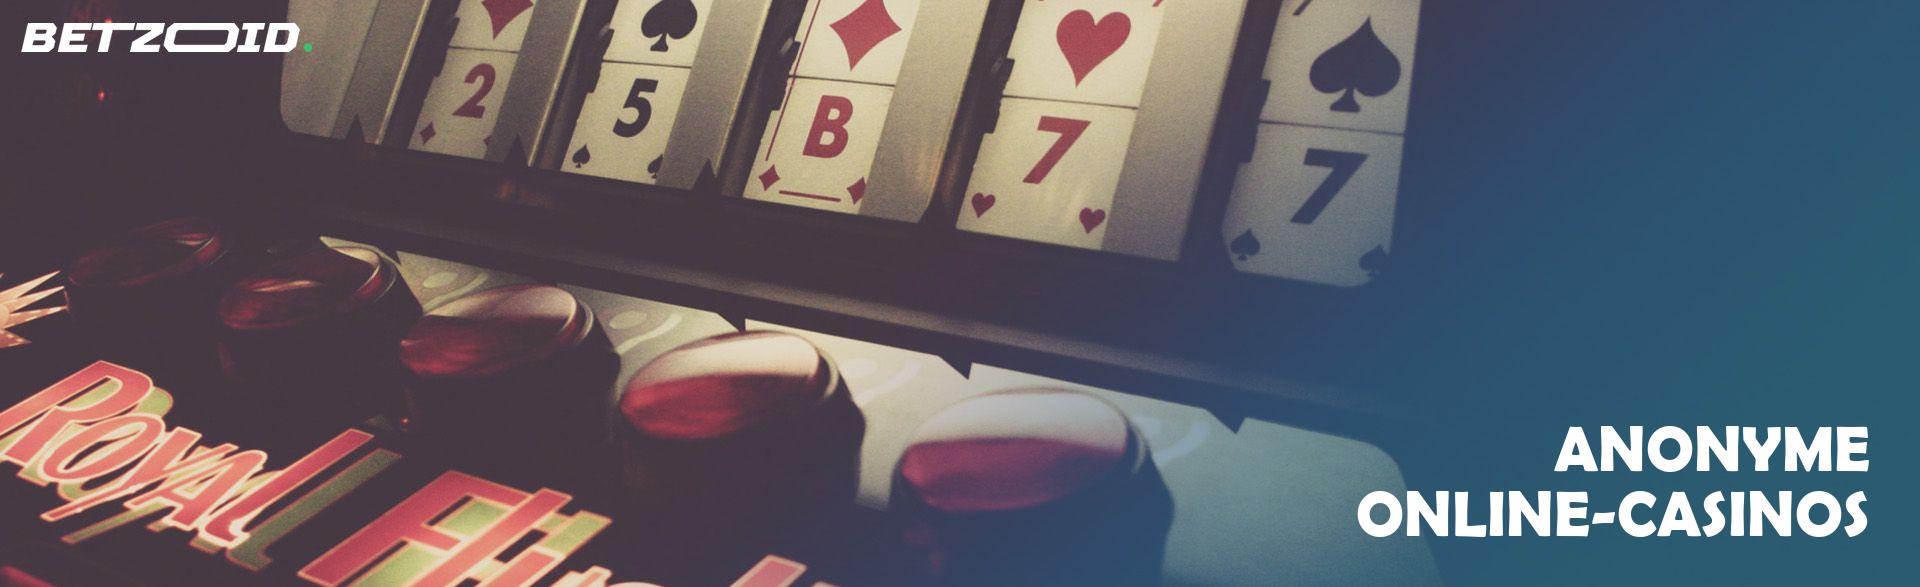 Anonyme Online-Casinos.